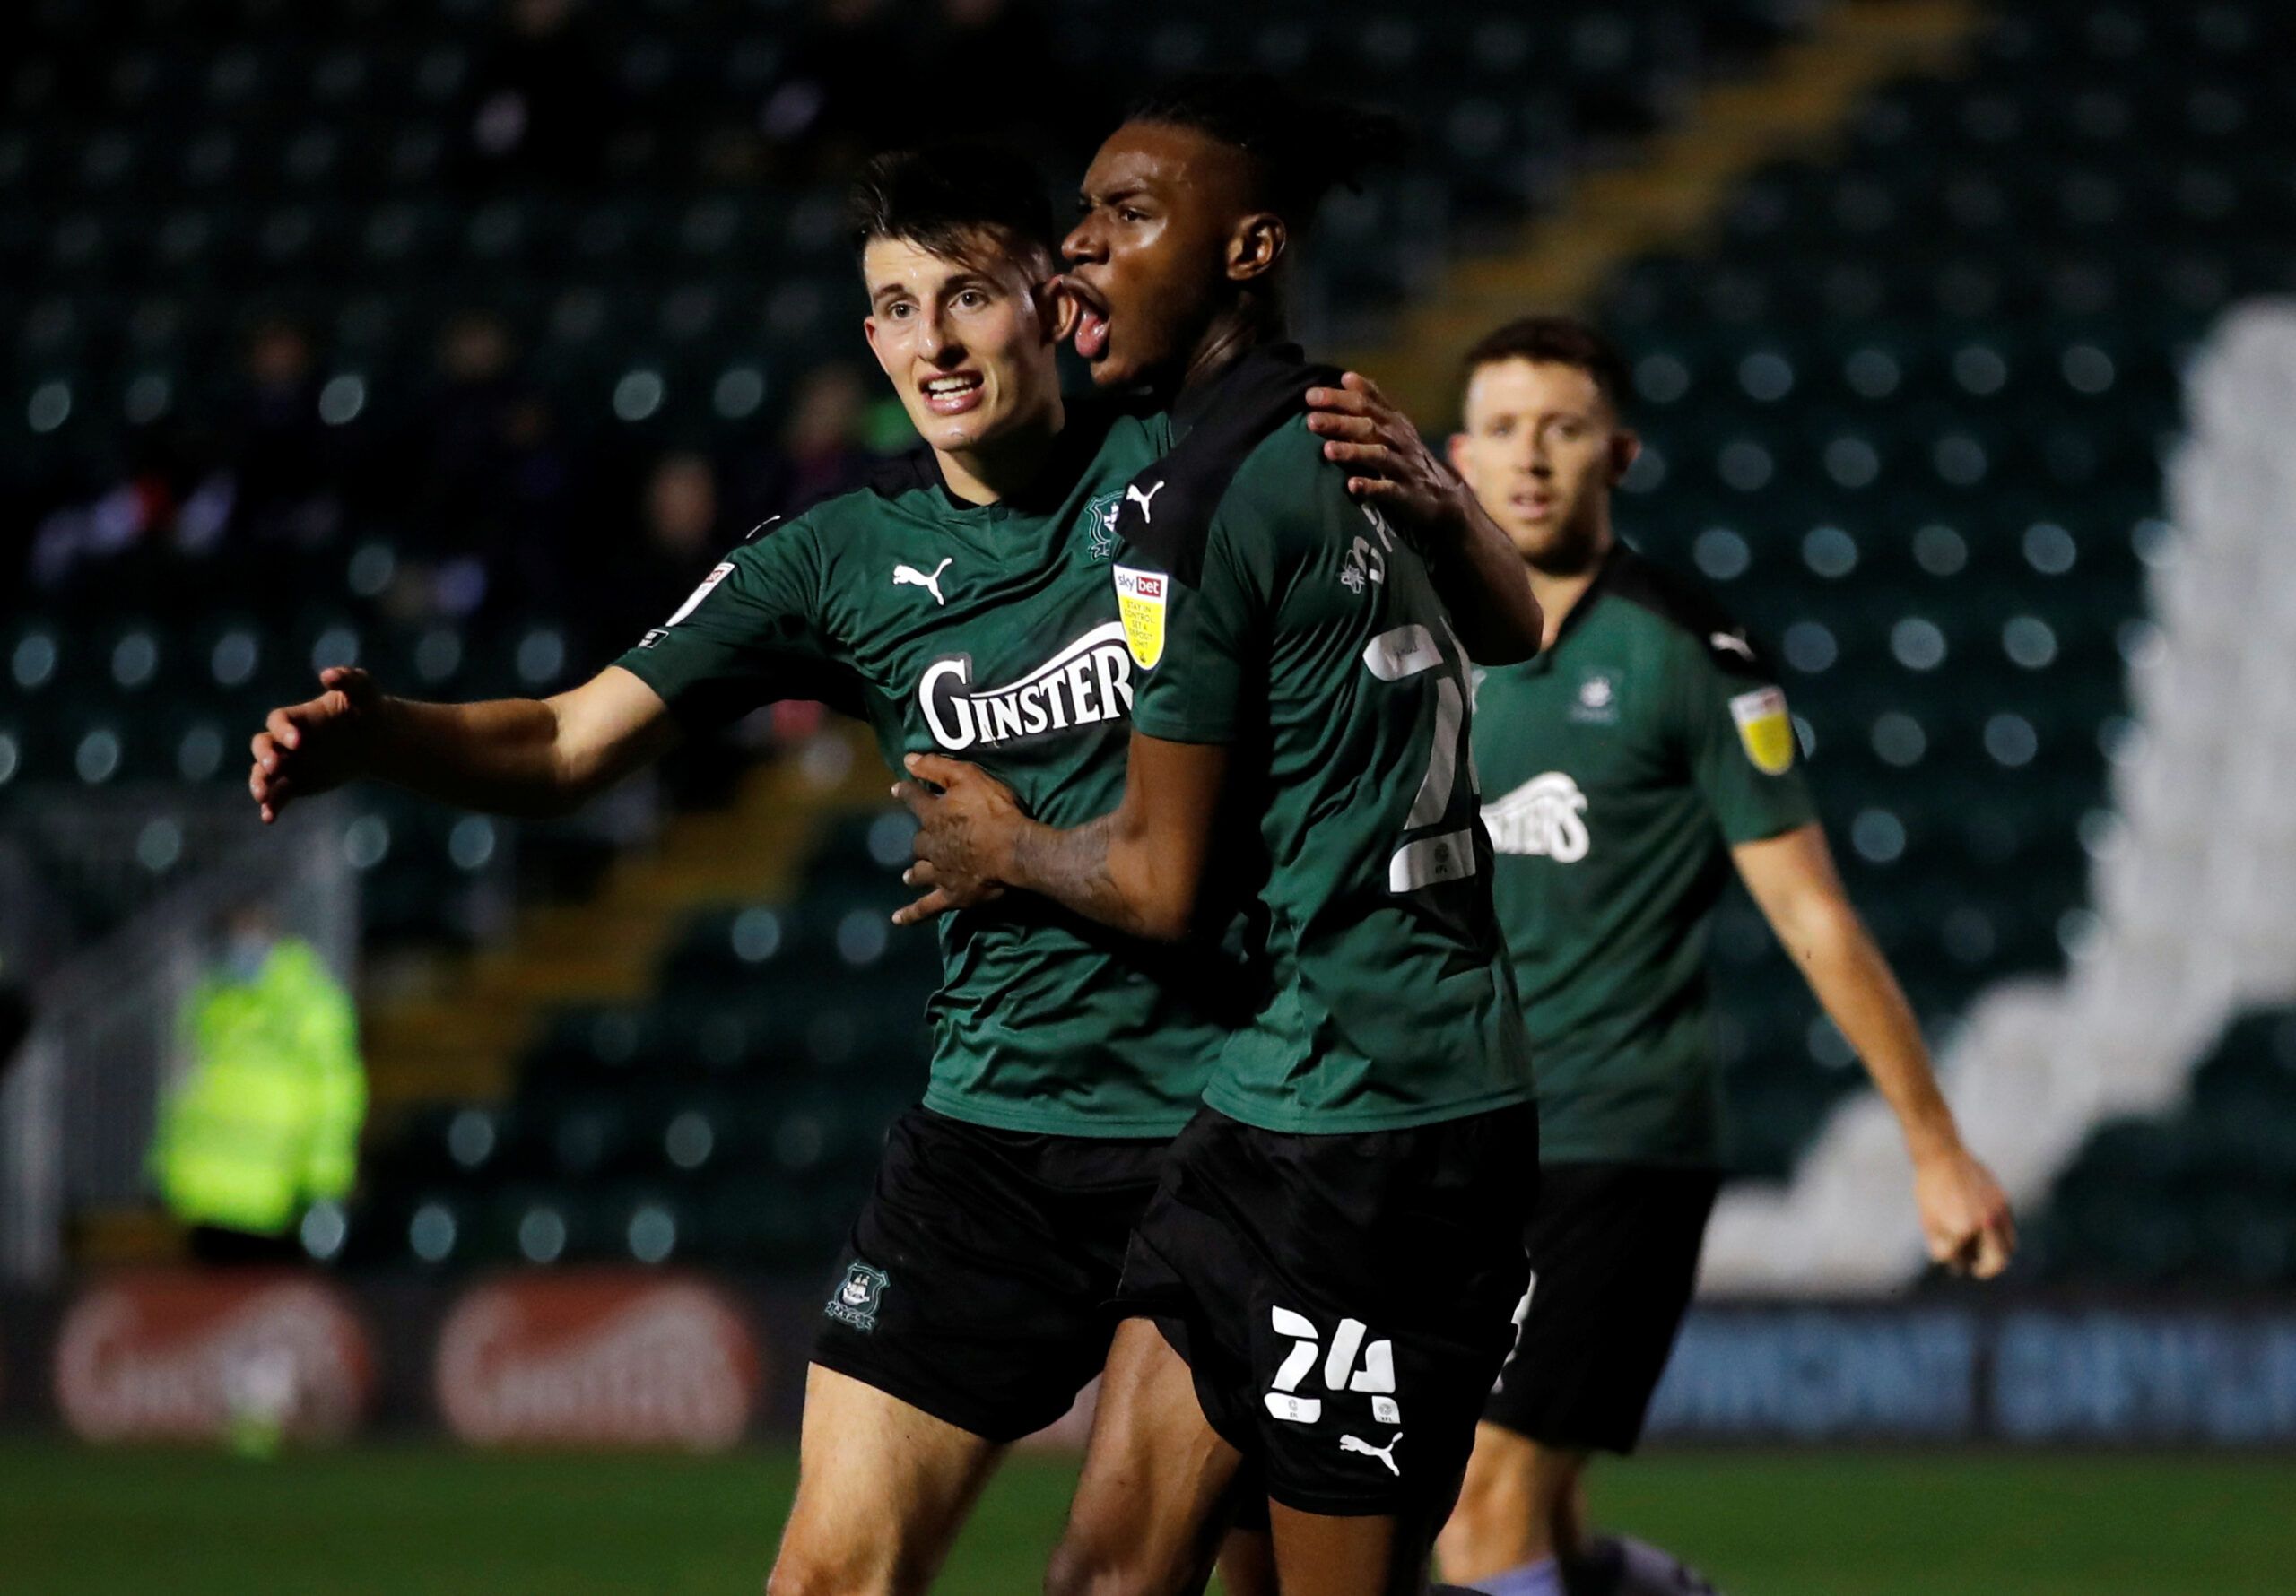 Soccer Football - League One - Plymouth Argyle v Portsmouth - Home Park, Plymouth, Britain - November 16, 2020   Plymouth Argyle's Jerome Opoku celebrates scoring their second goal    Action Images/Andrew Couldridge    EDITORIAL USE ONLY. No use with unauthorized audio, video, data, fixture lists, club/league logos or 